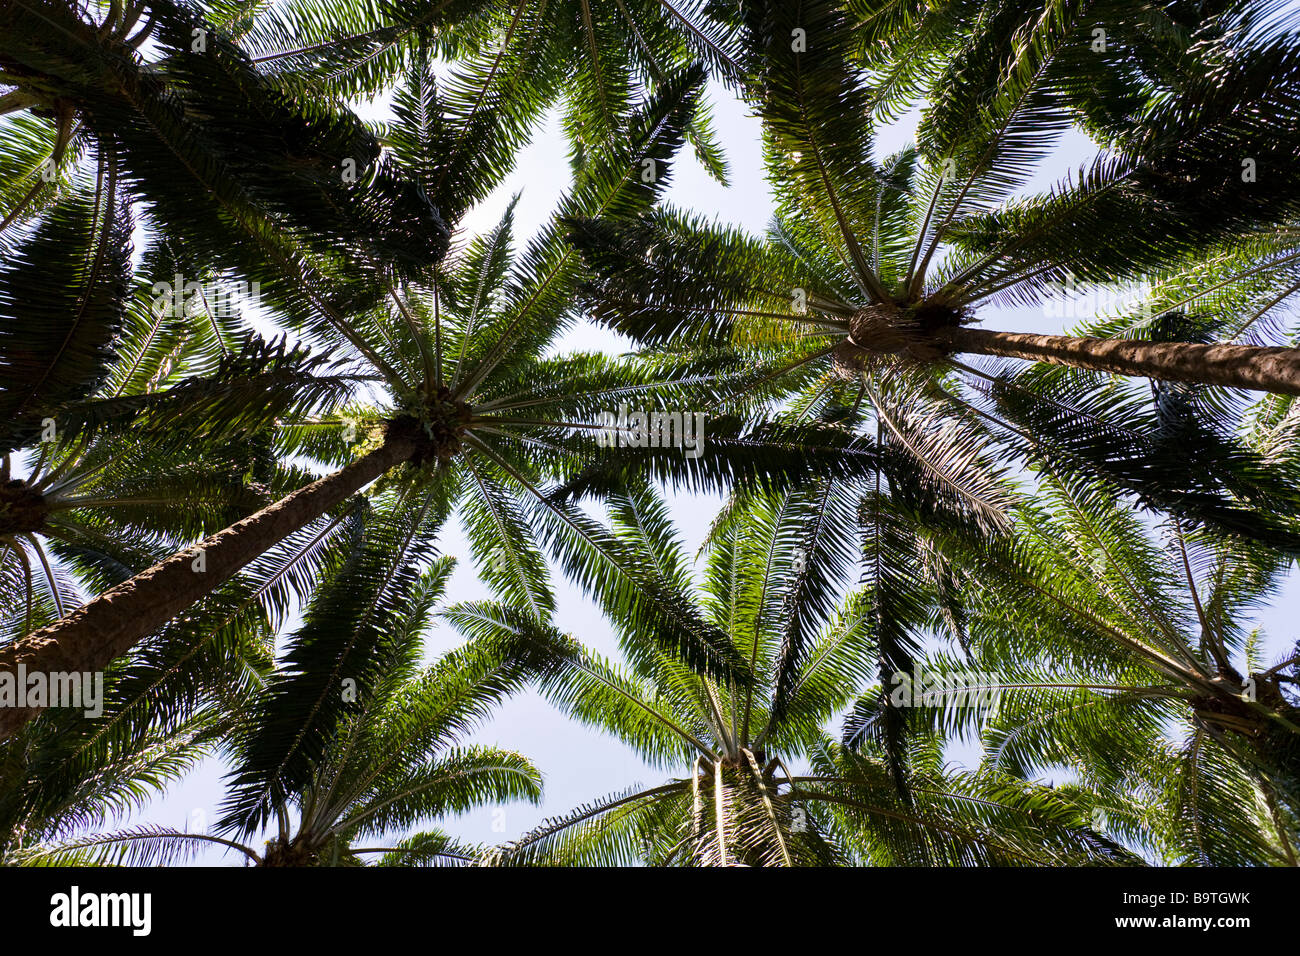 African palm trees (Elaeis guineensis) at a palm oil plantation farm in Costa Rica. Stock Photo